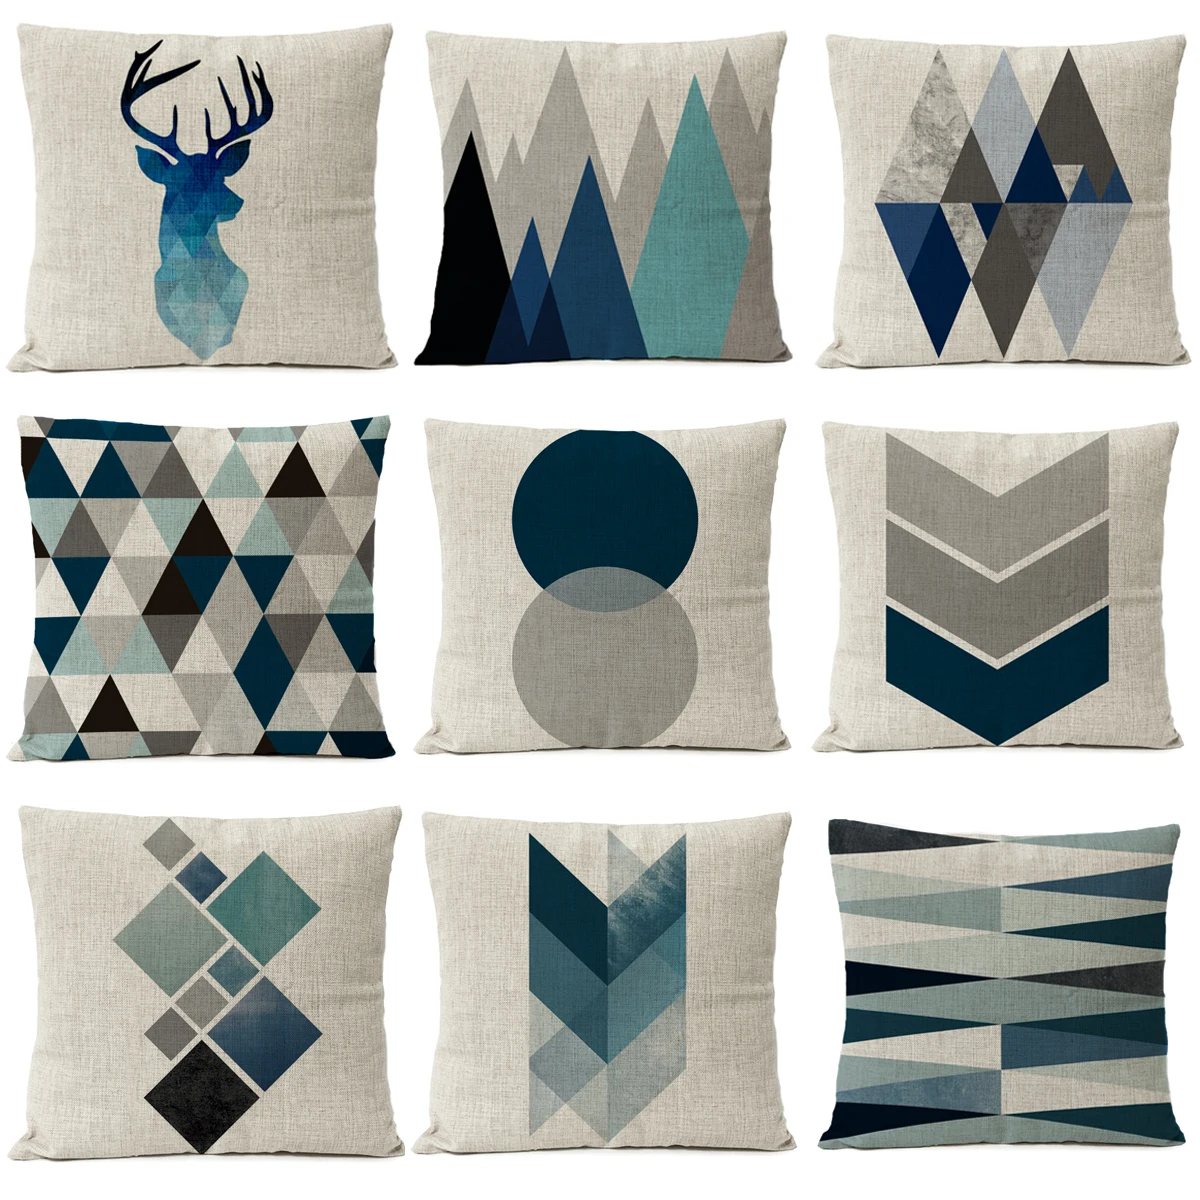 

Nordic Blue Geometric Marble Pillow Cover Deer Cushion Cover Home Decorative Throw Linen Pillowcase sofa Pillow Covers